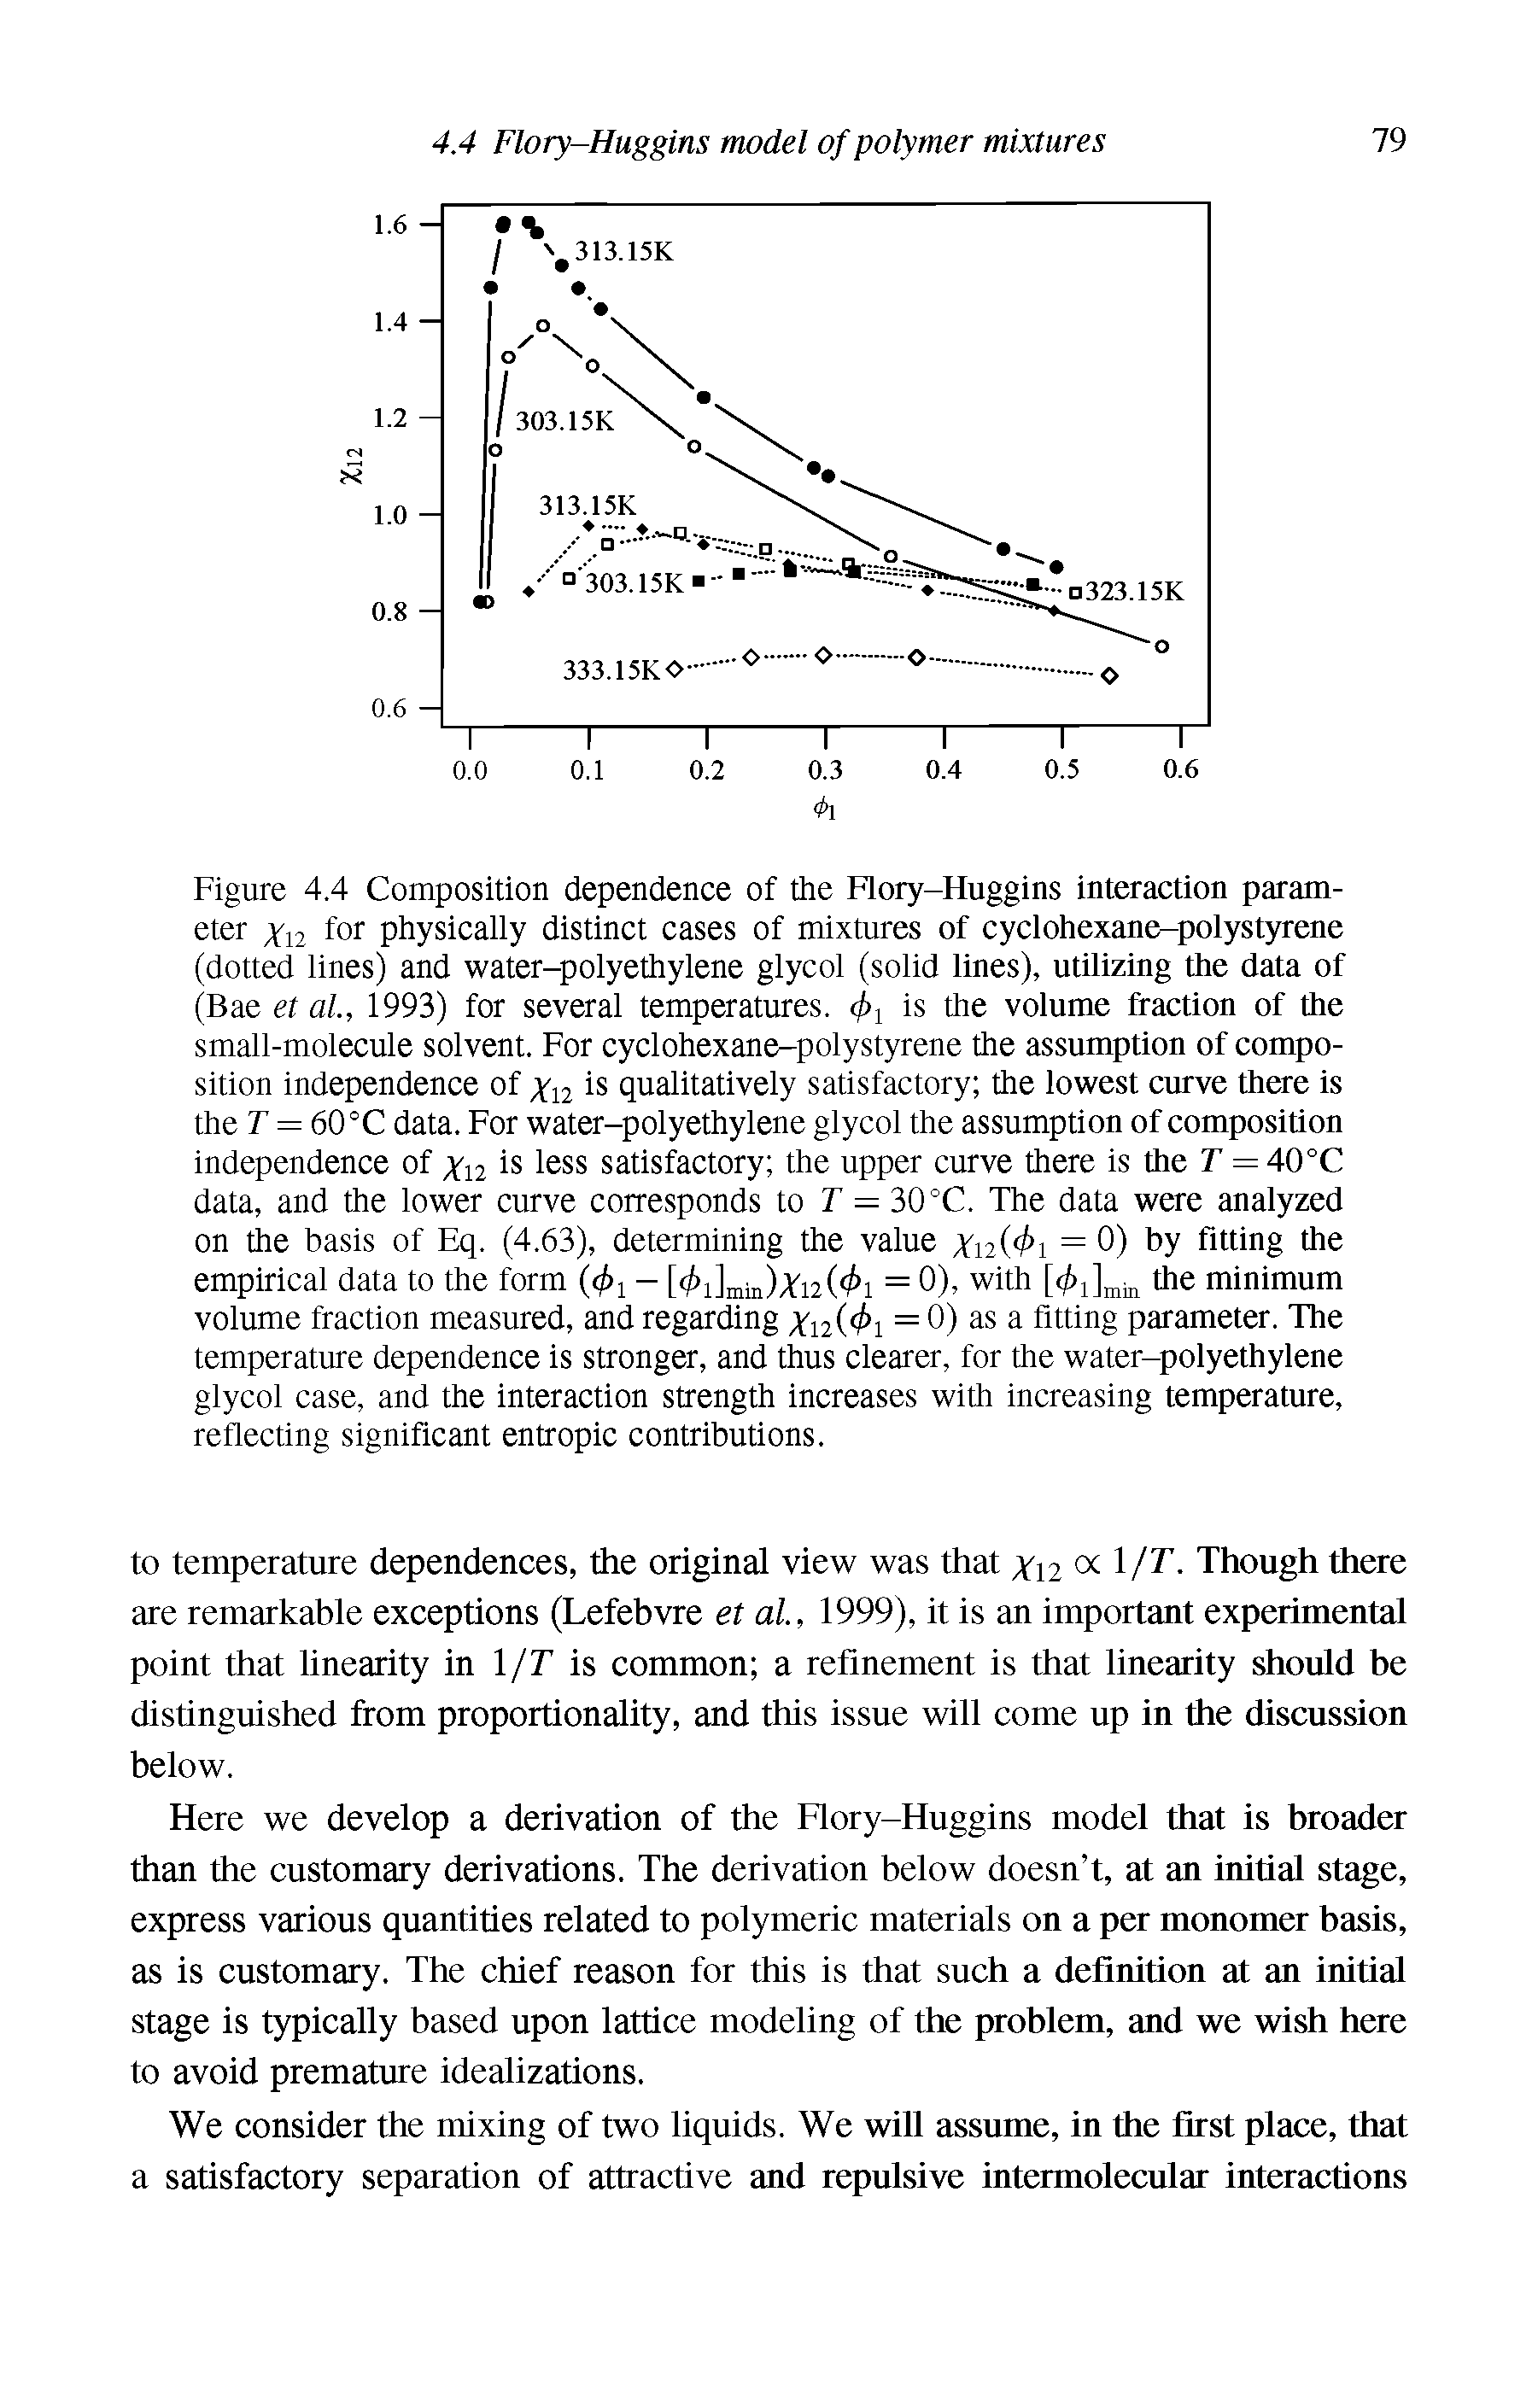 Figure 4.4 Composition dependence of the Hory-Huggins interaction parameter Xn for physically distinct cases of mixtures of cyclohexane-polystyrene (dotted lines) and water-polyethylene glycol (solid lines), utilizing the data of (Bae et al, 1993) for several temperatures. 4>i is the volume fraction of the small-molecule solvent. For cyclohexane-polystyrene the assumption of composition independence of Xu is qualitatively satisfactory the lowest curve there is the r = 60°C data. For water-polyethylene glycol the assumption of composition independence of Xn is less satisfactory the upper curve there is the T = 40°C data, and the lower curve corresponds to F = 30 °C. The data were analyzed on the basis of Eq. (4.63), determining the value Xi2(4>i = 0) by fitting the empirical data to the form (c j - [<(>i]niin)Ti2( i = 0)> with the minimum...